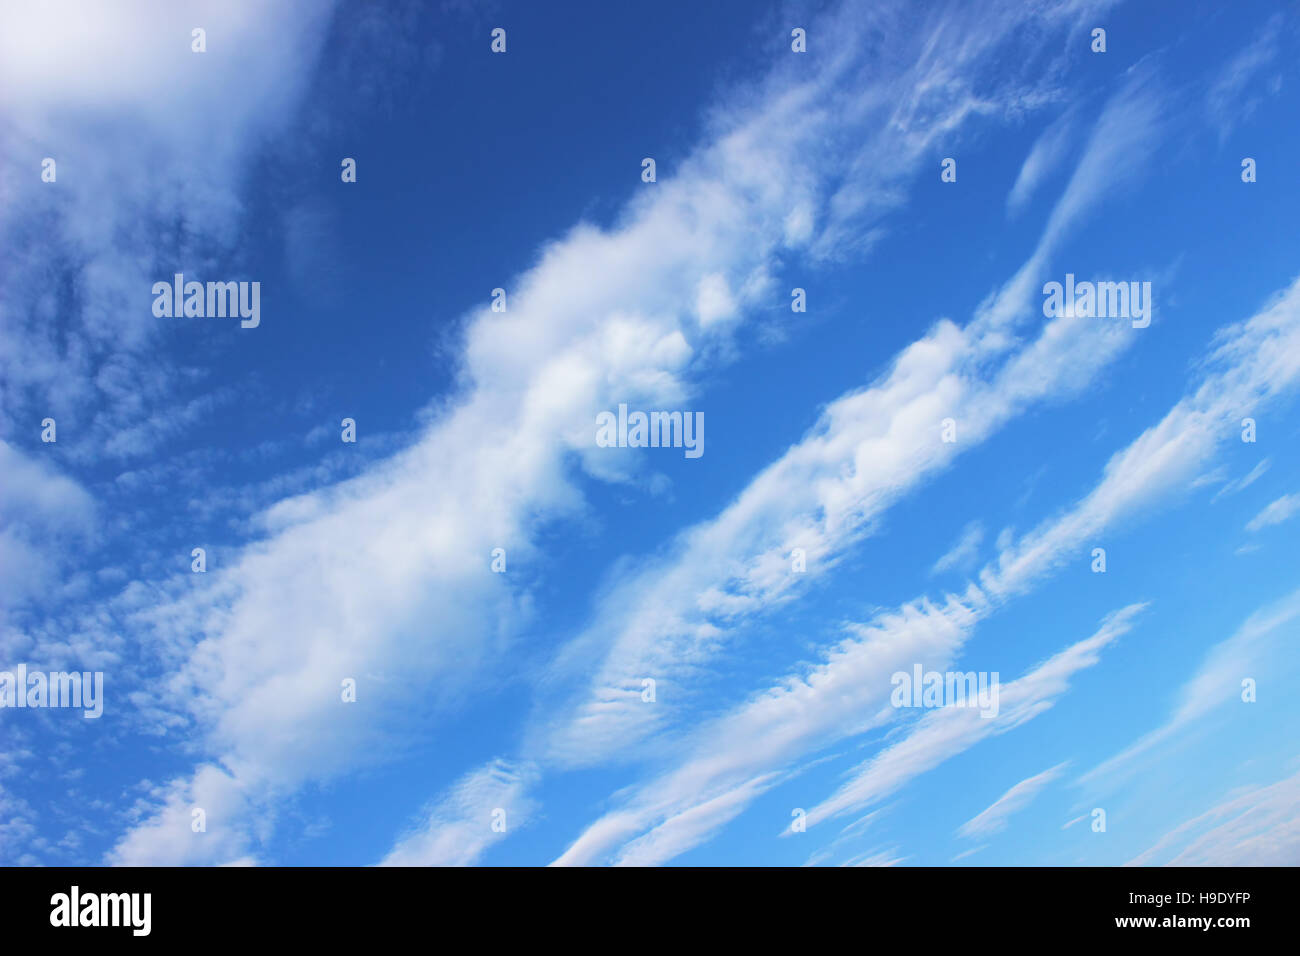 Bands of fair weather clouds arranged in waves across the blue sky. Stock Photo